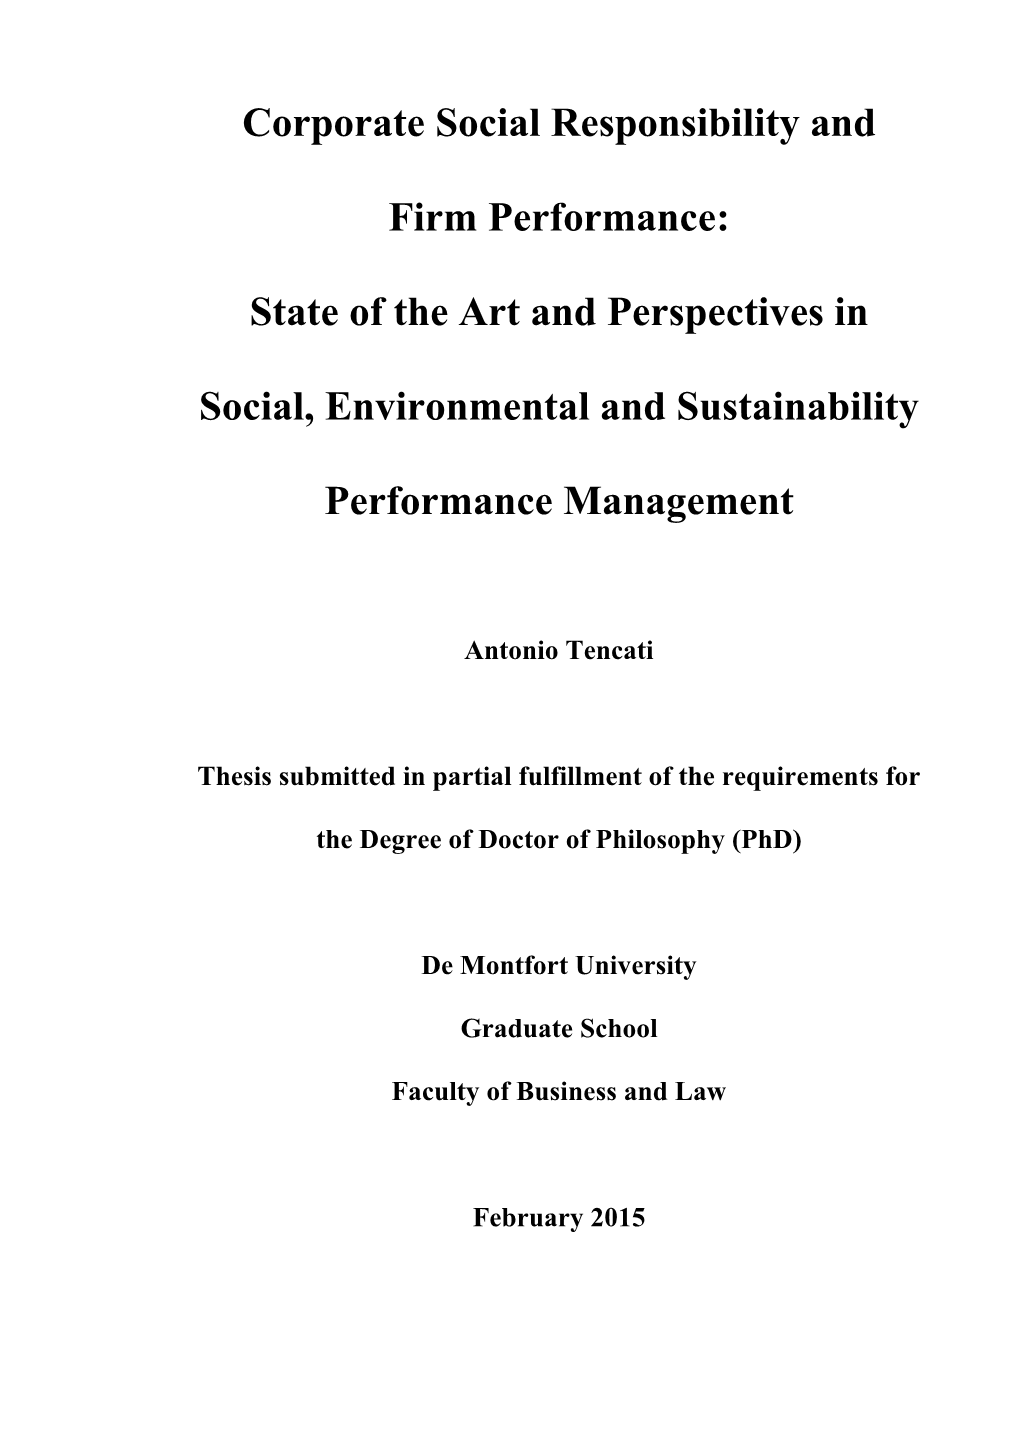 State of the Art and Perspectives in Social, Environmental And